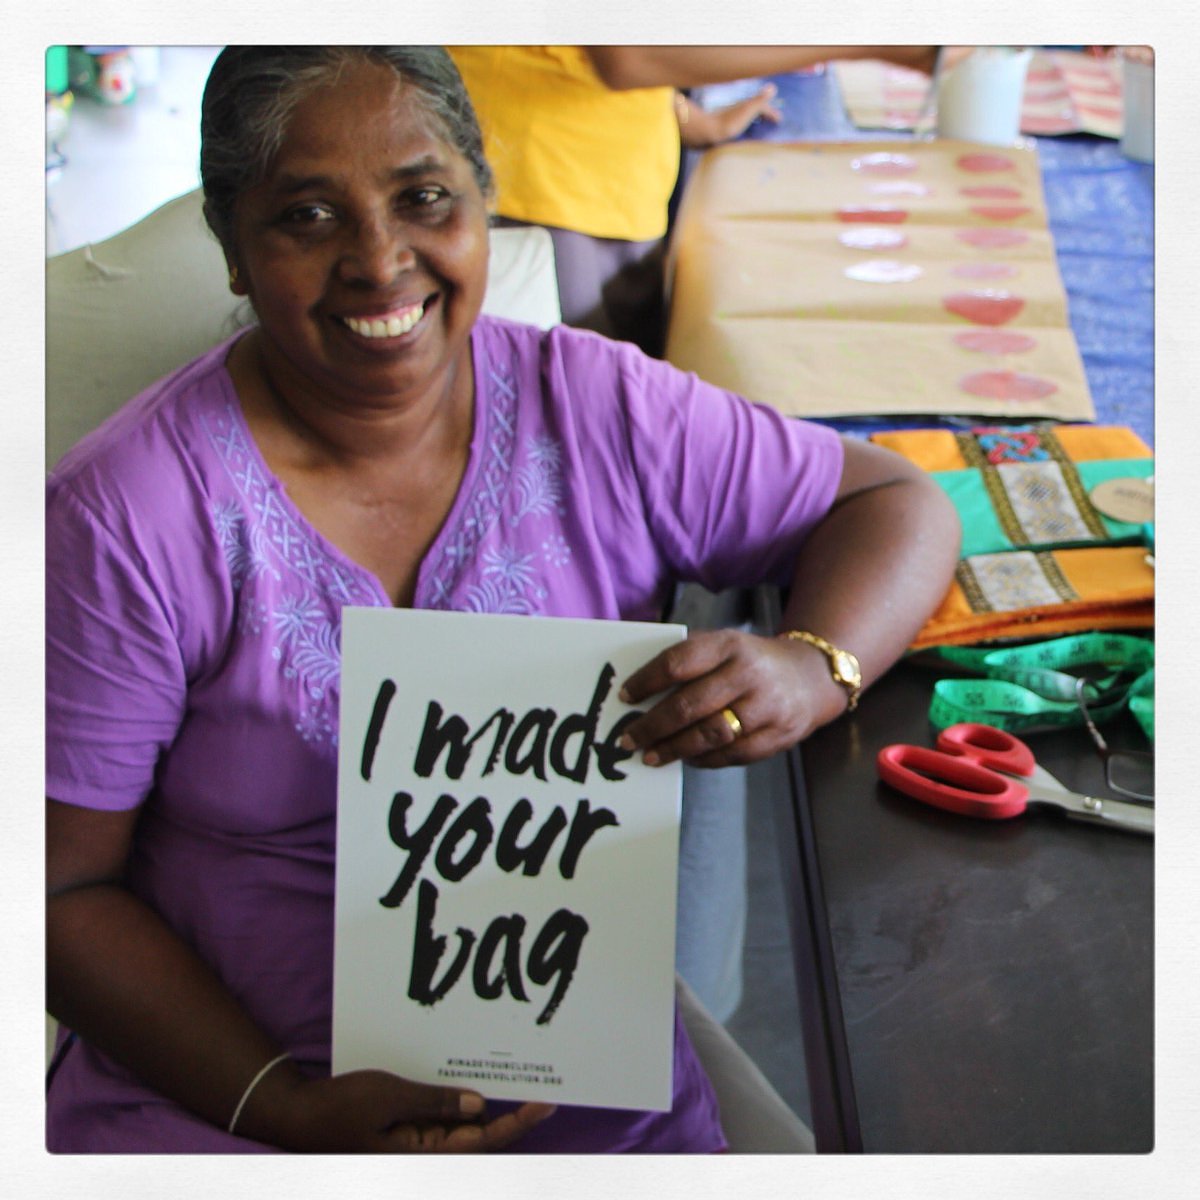 Faces behind the creation of our sustainable ecofriendly bags! 

#handmade #riti #ritindia #imadeyourbag #sustainablefashion #style #fashion #sustainablestyle #sustainableliving #ecoconscious #ecoconsciousfashion #ecofashion #ecoliving #ecostyle #handmadebags #fashrev